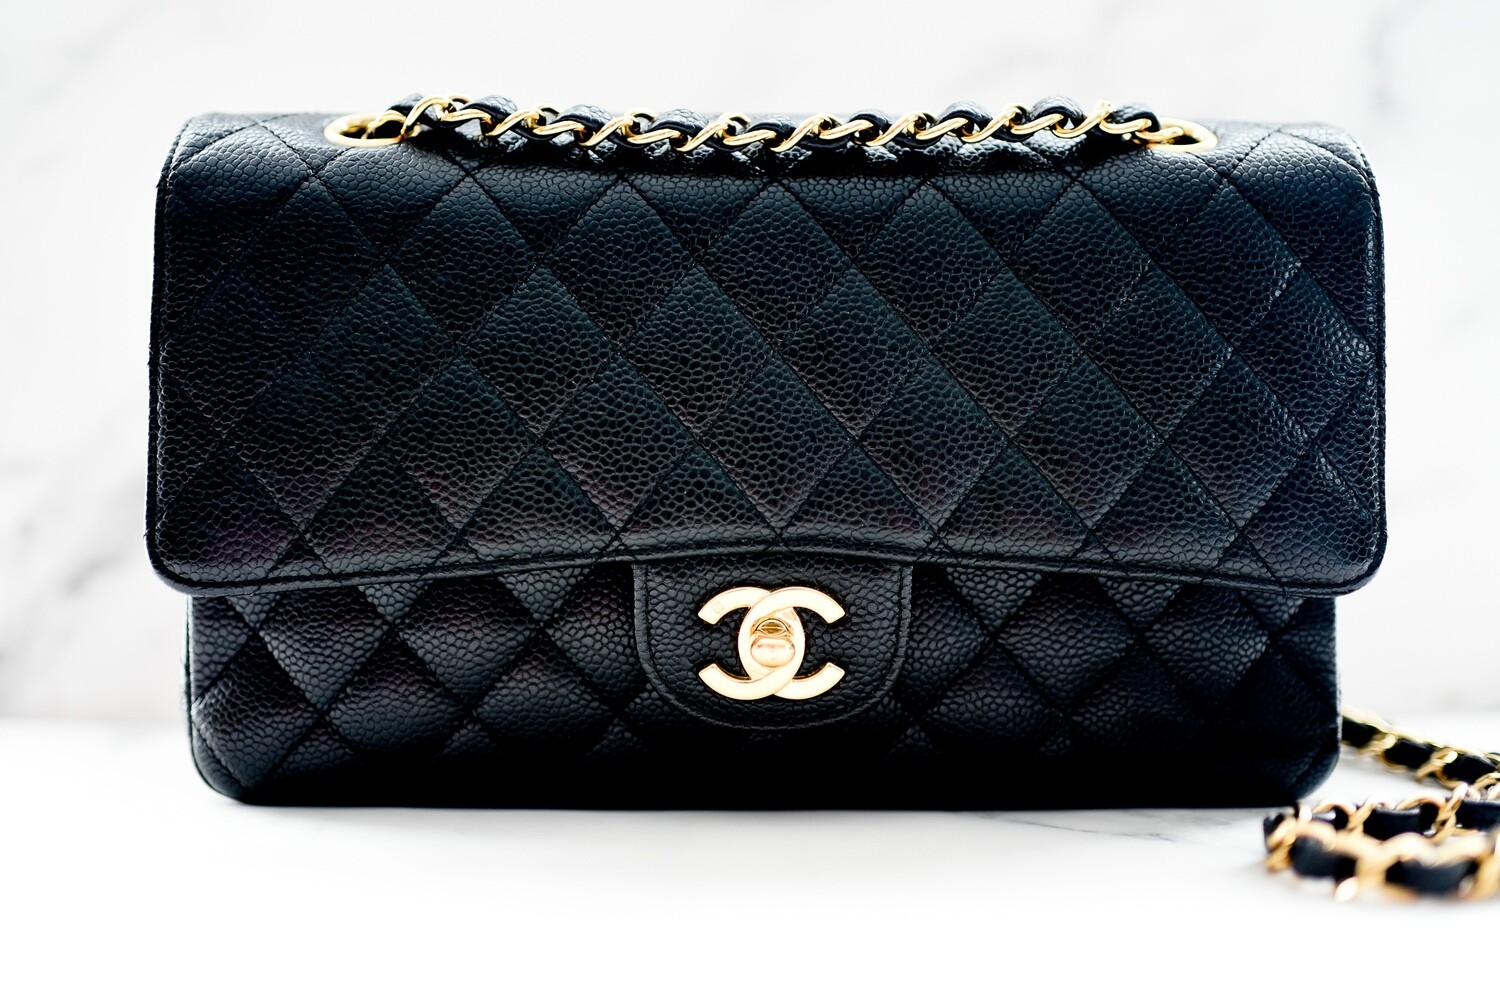 Chanel Vintage Medium Classic Flap, Black Caviar with Gold Plated